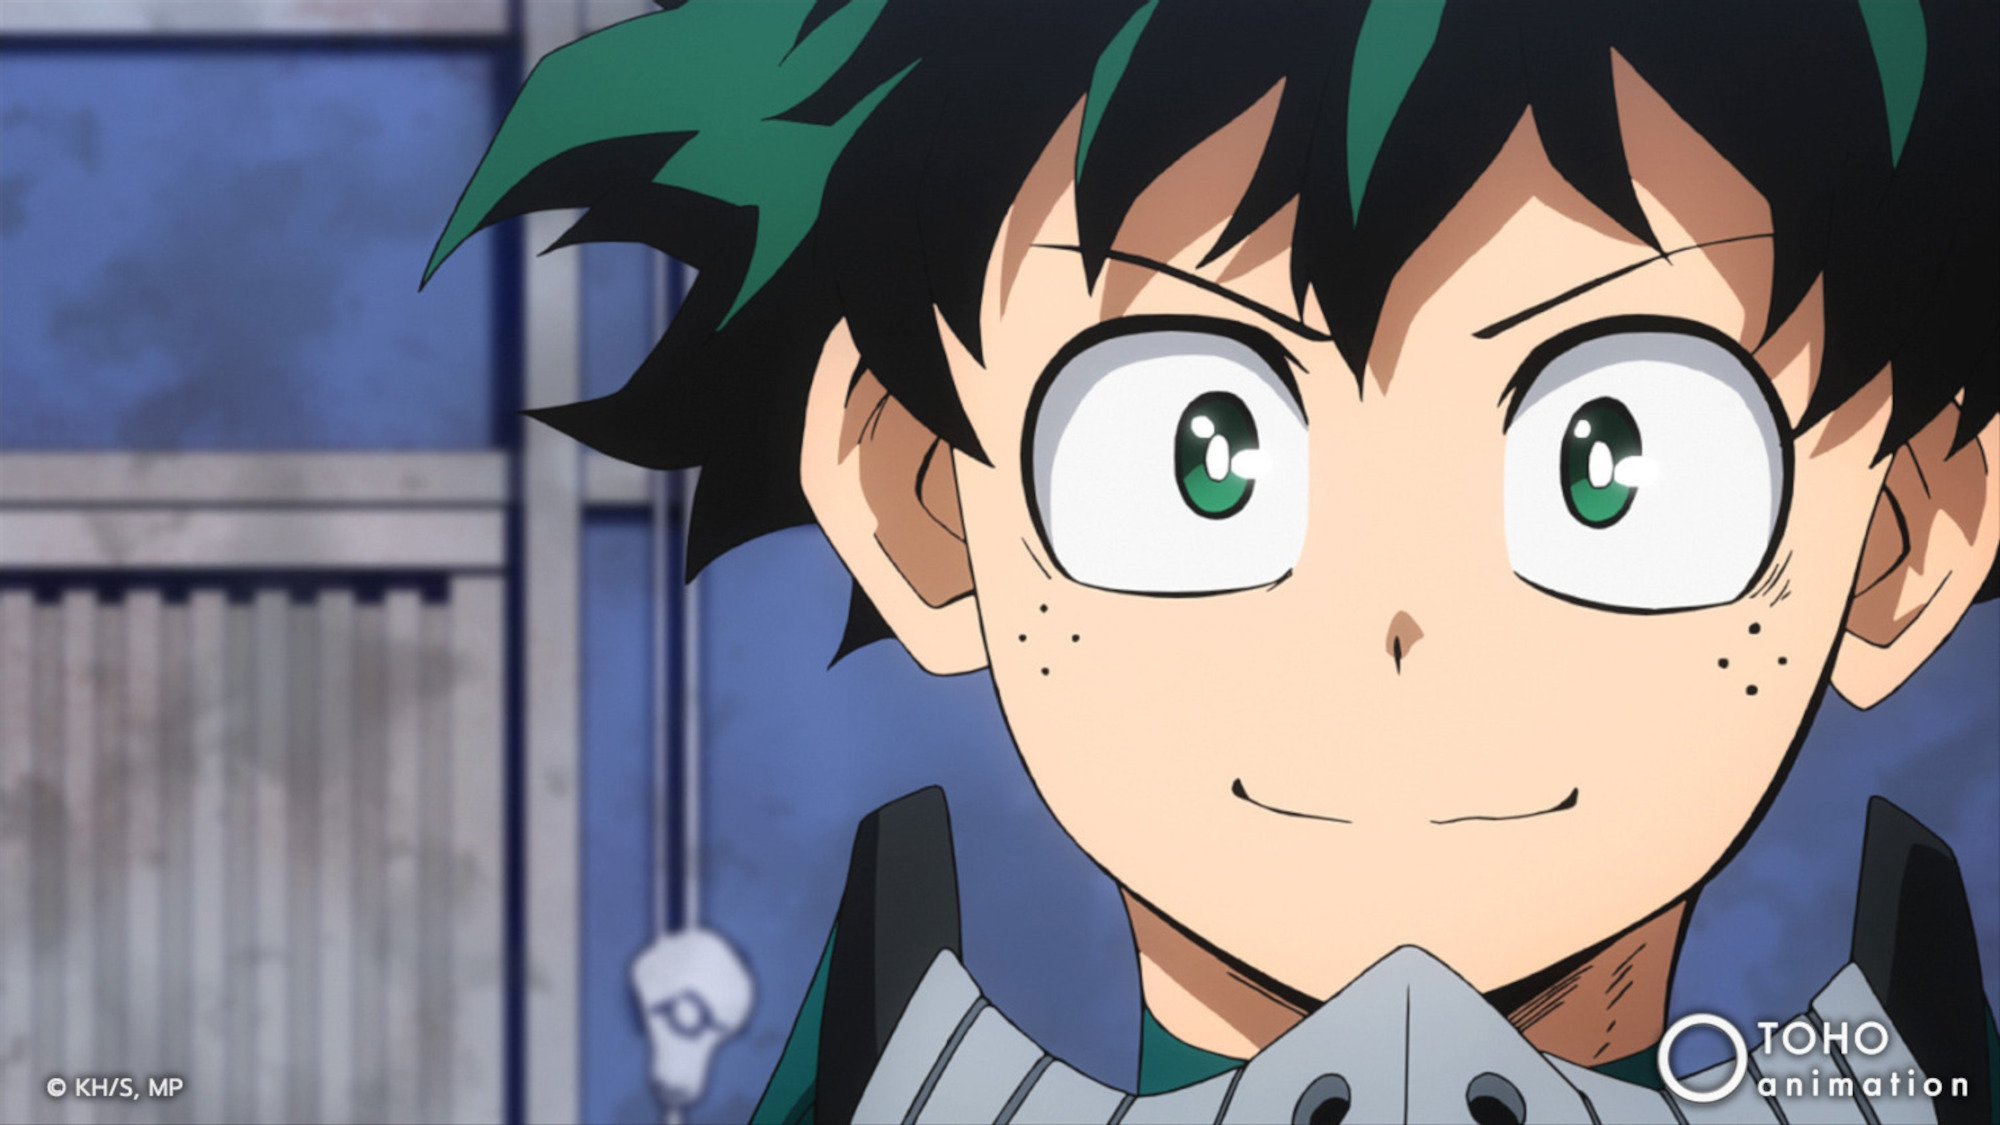 Crunchyroll Brings My Hero Academia Season 6 Part 1 and More to Home Video  this December